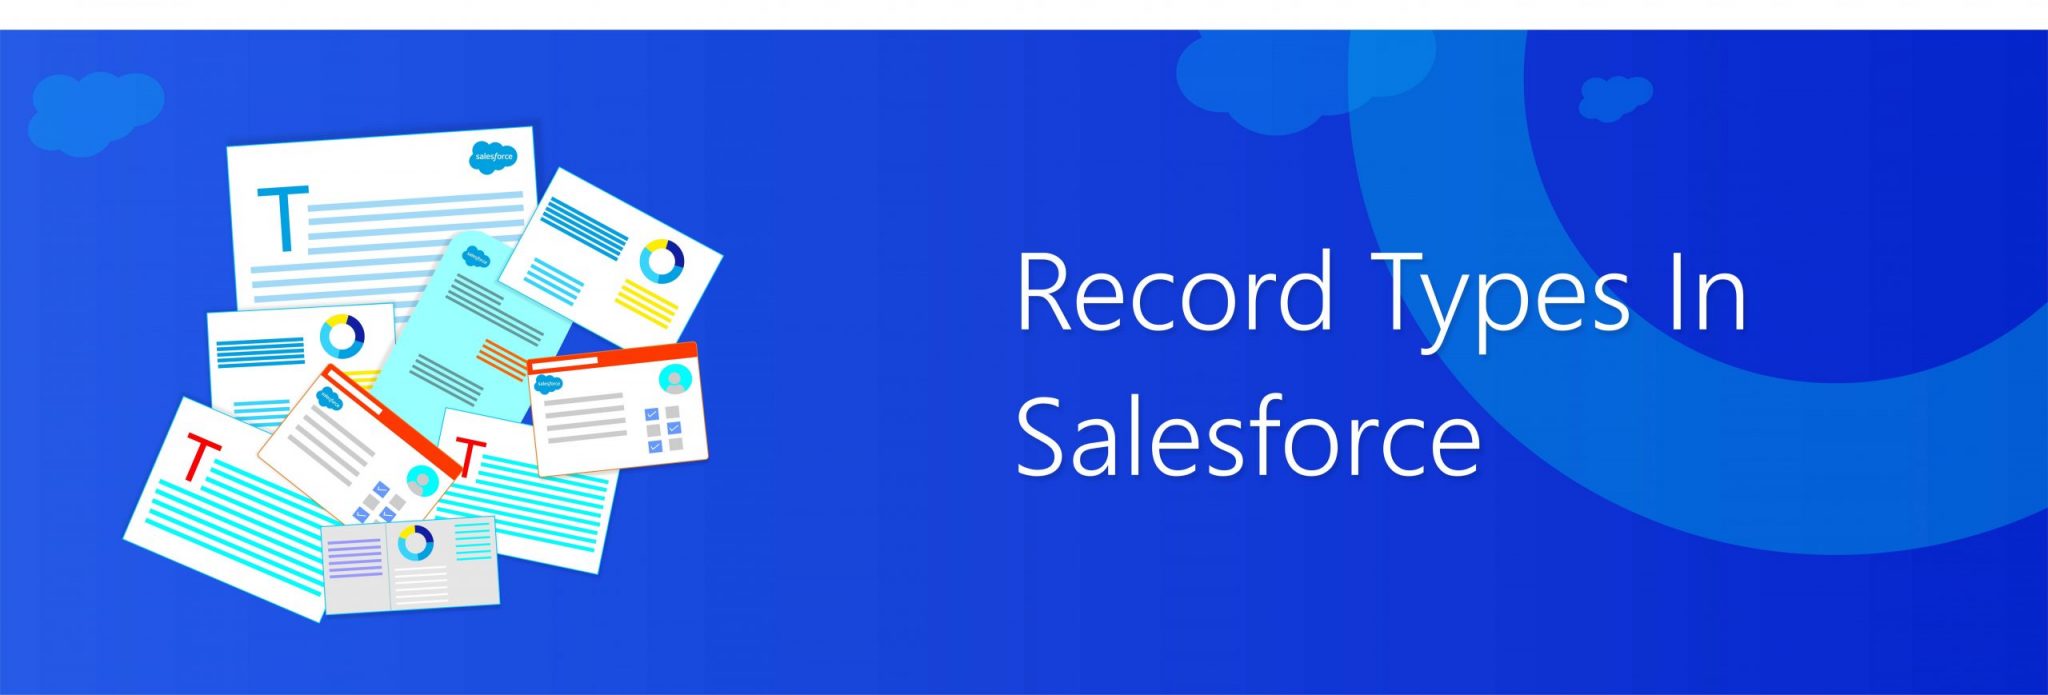 Record Types in Salesforce